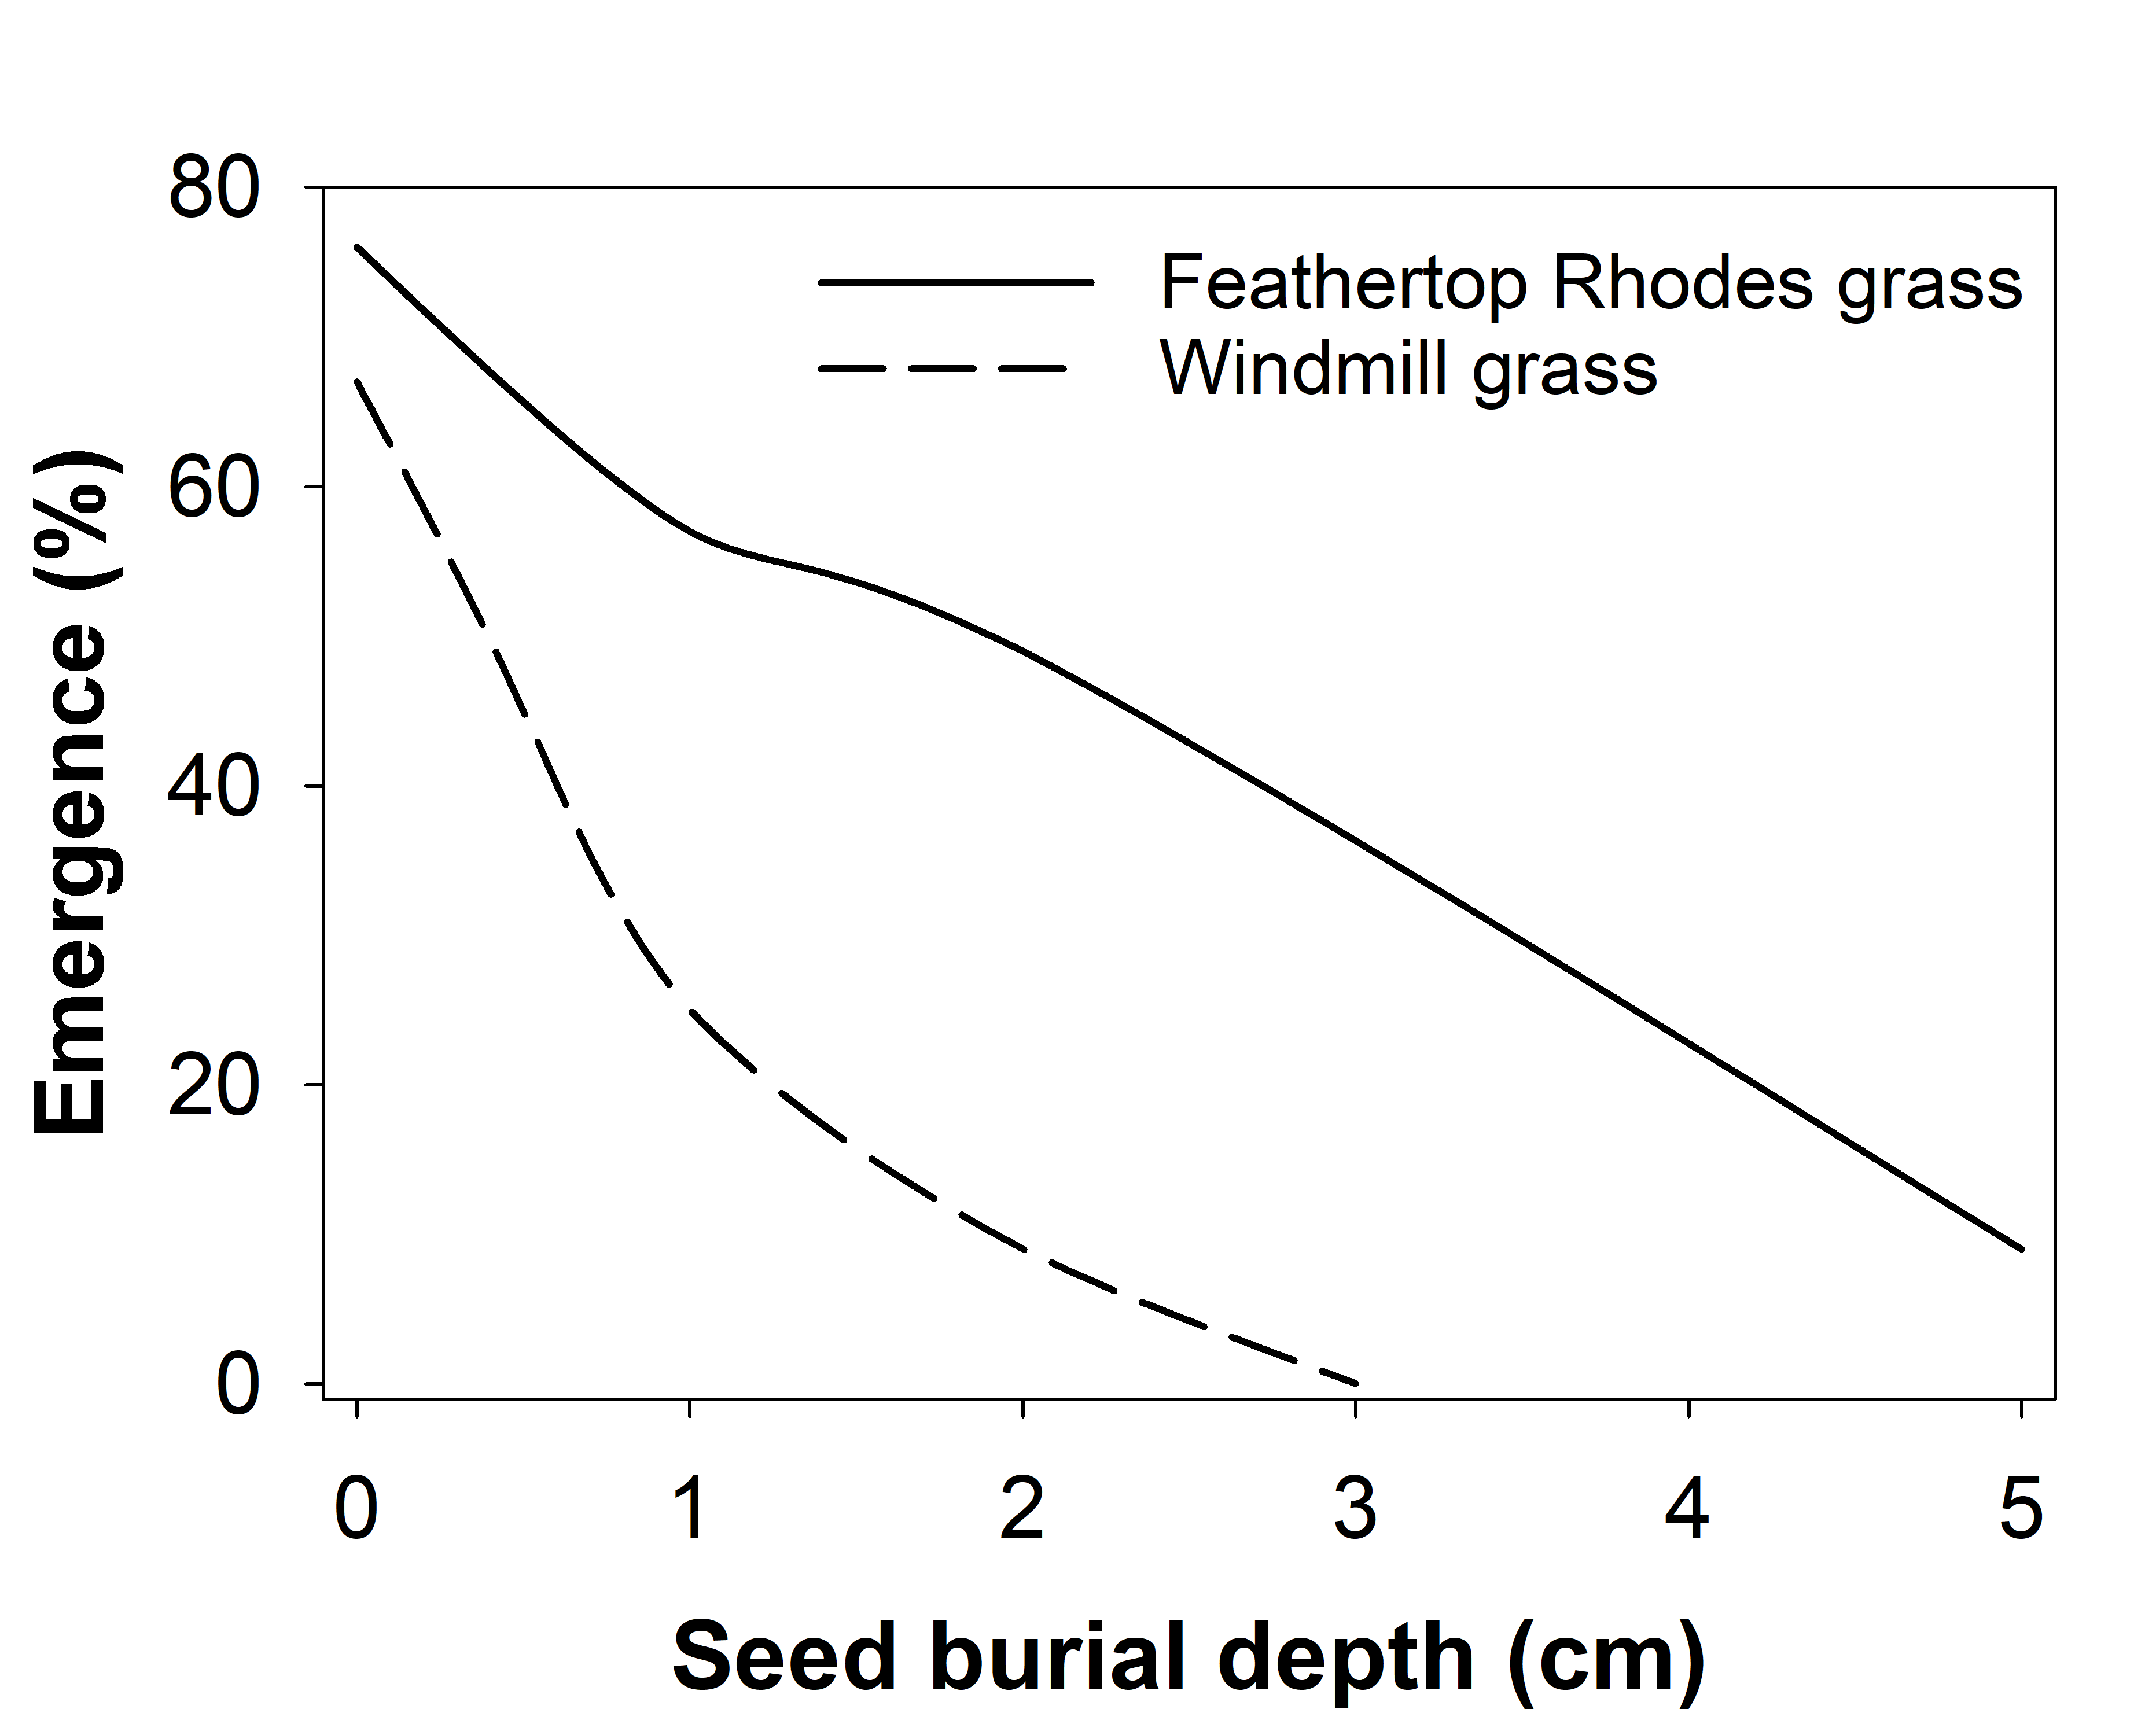 This line graph shows the effect of seed burial depth (cm) on seedling emergence of feathertop Rhodes grass  (Ngo et al. 2017) and windmill grass (Chauhan et al. 2018)